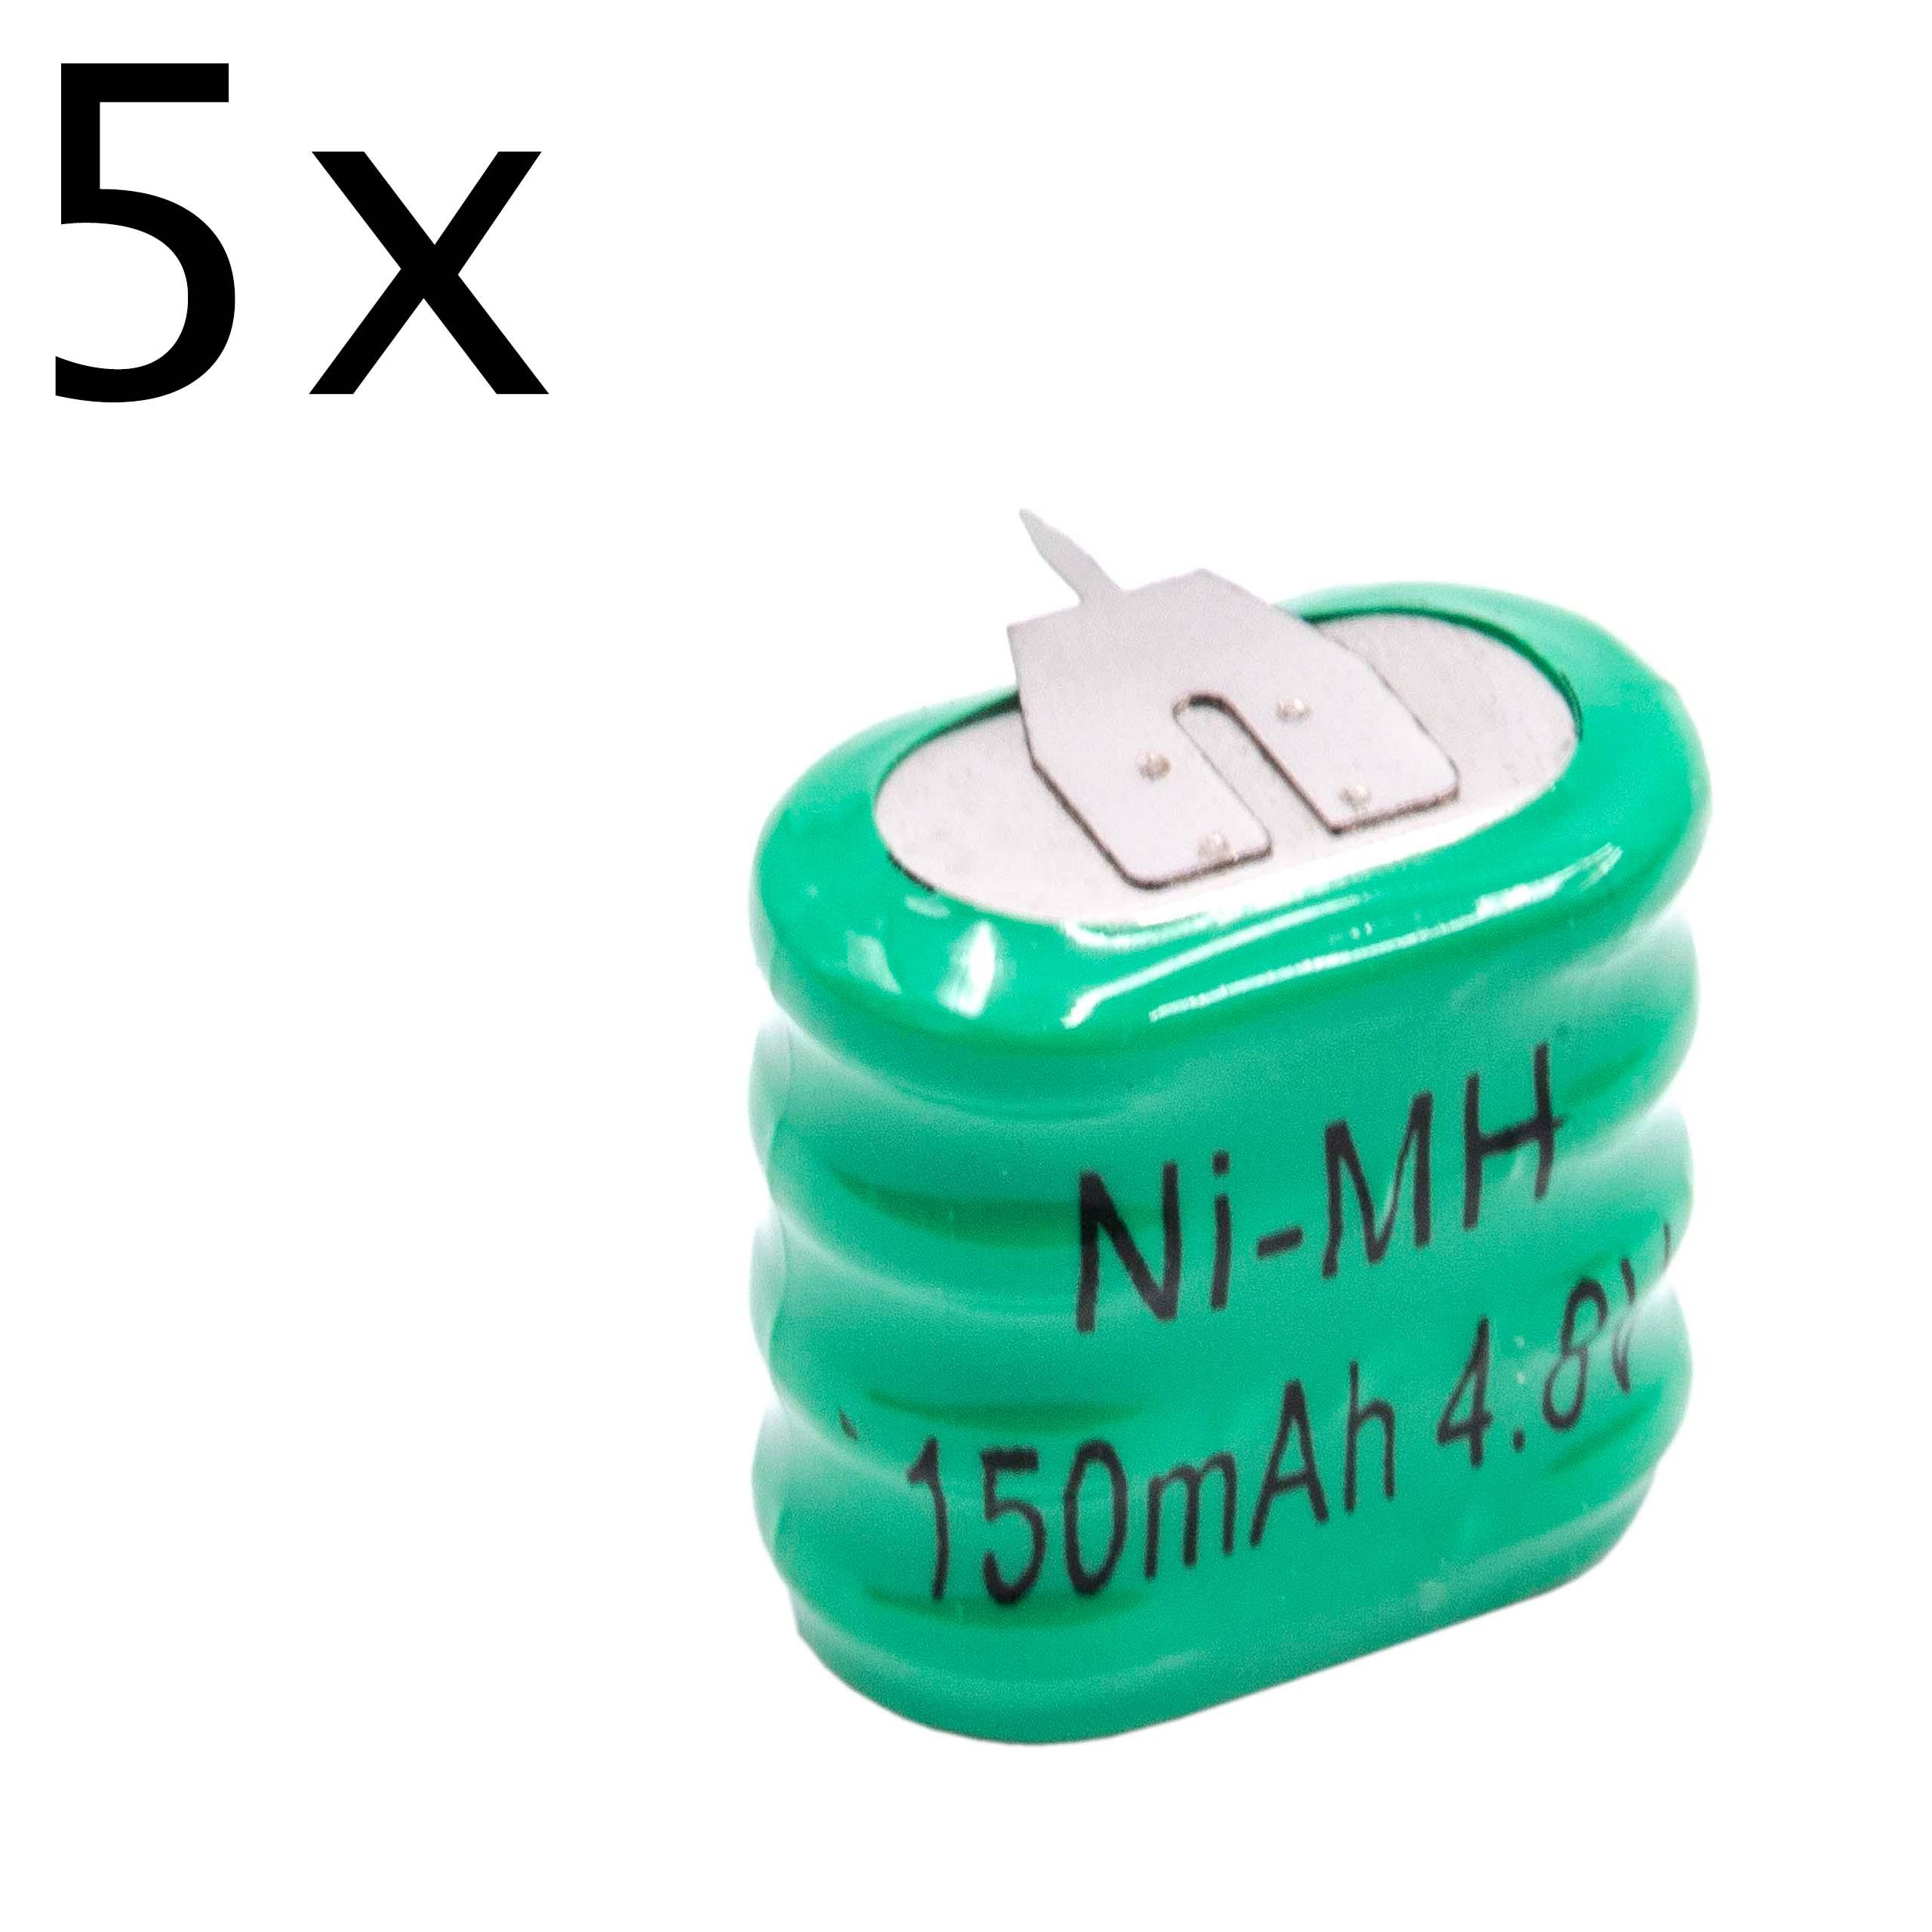 5x Button Cell Battery (4x Cell) Type 4/V150H 3 Pins for Model Building Solar Lamps etc. - 150mAh 4.8V NiMH